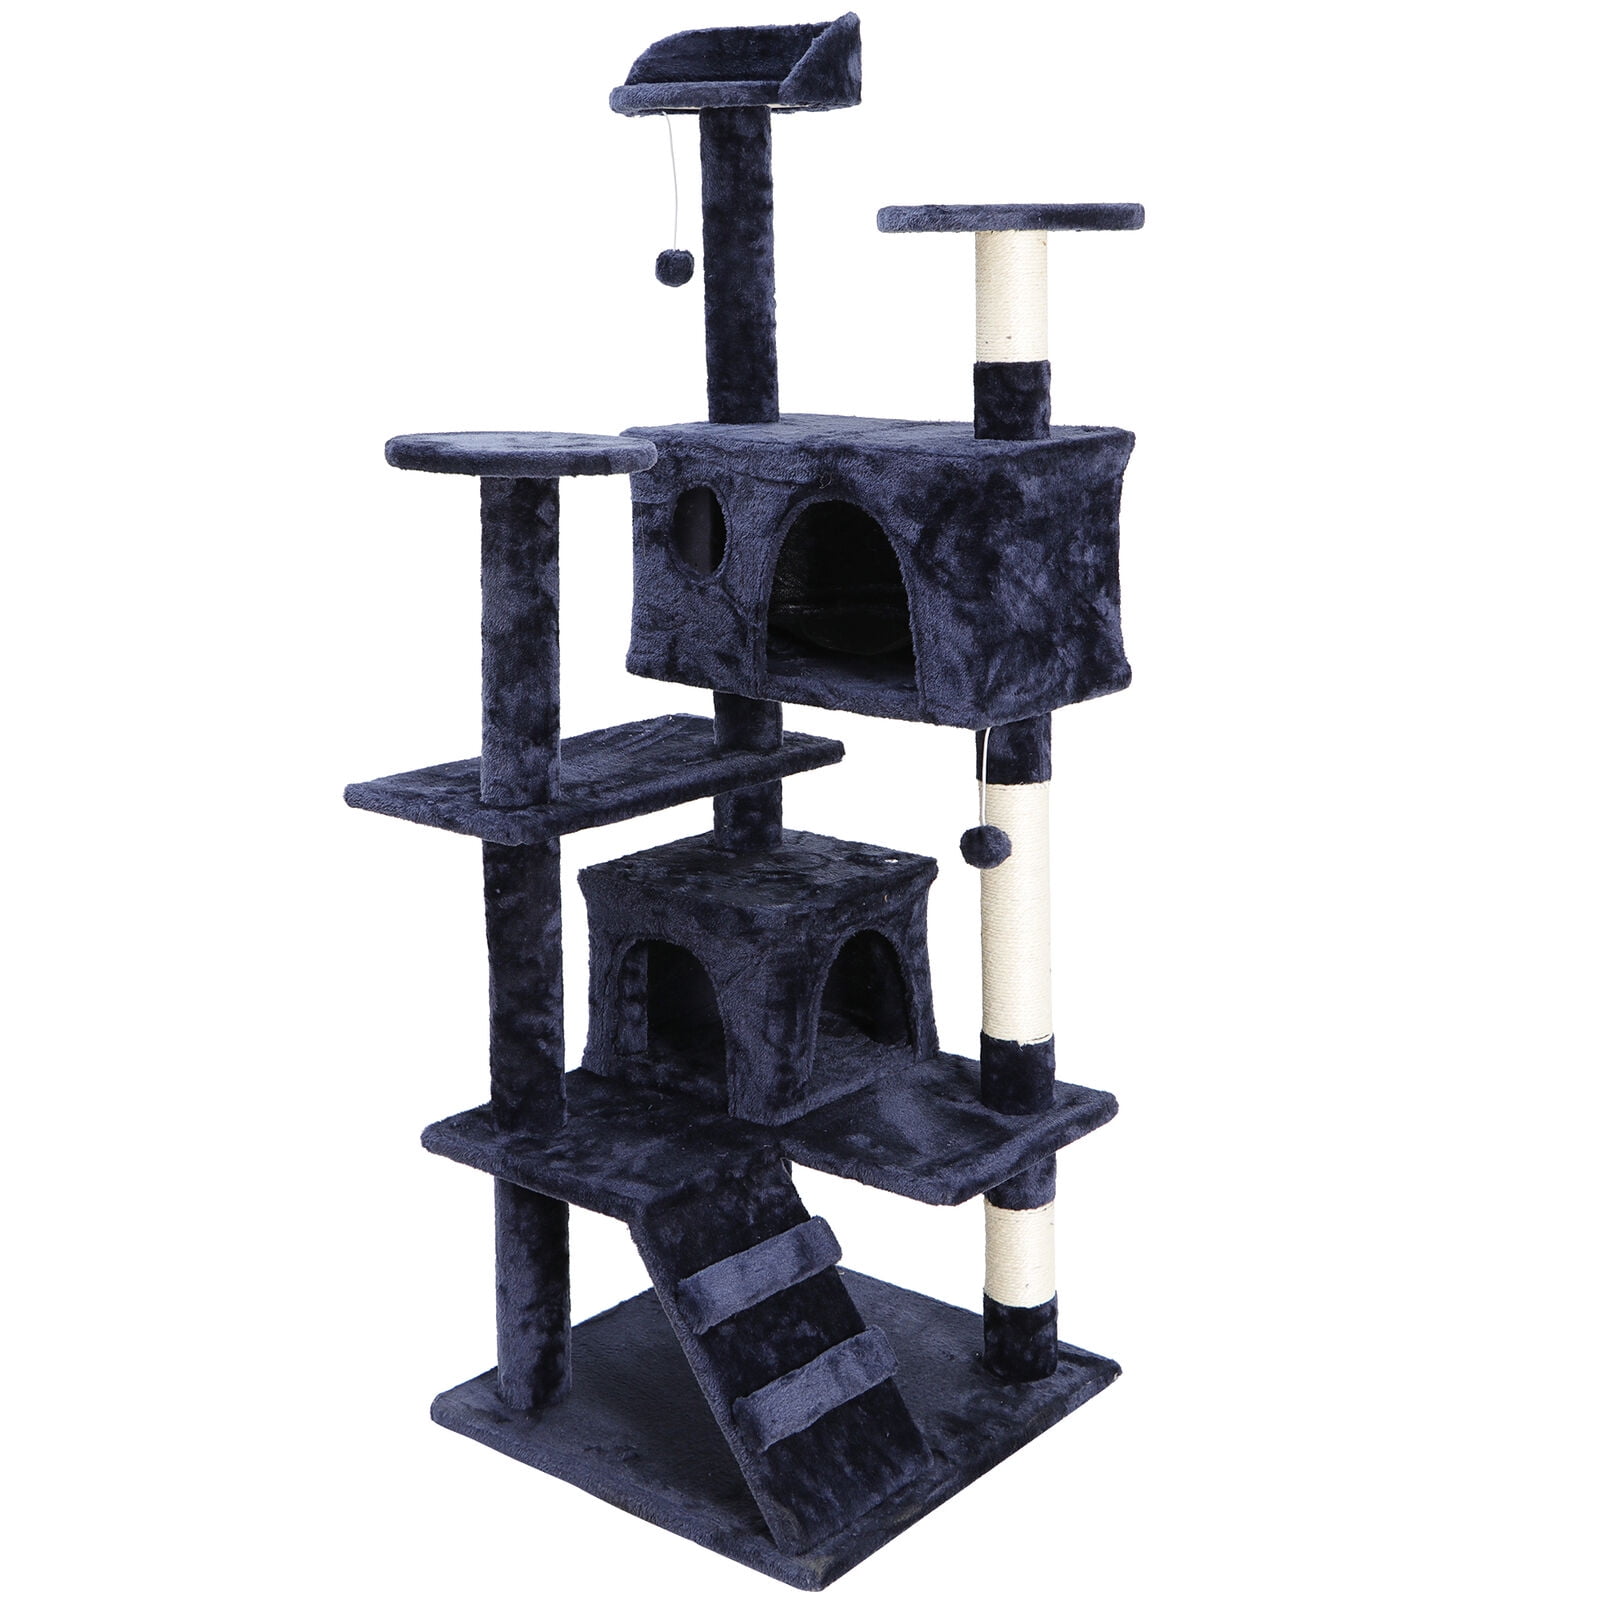 Homessity Cat Tree House Condo Bed Scratching Post Furniture HC-012 